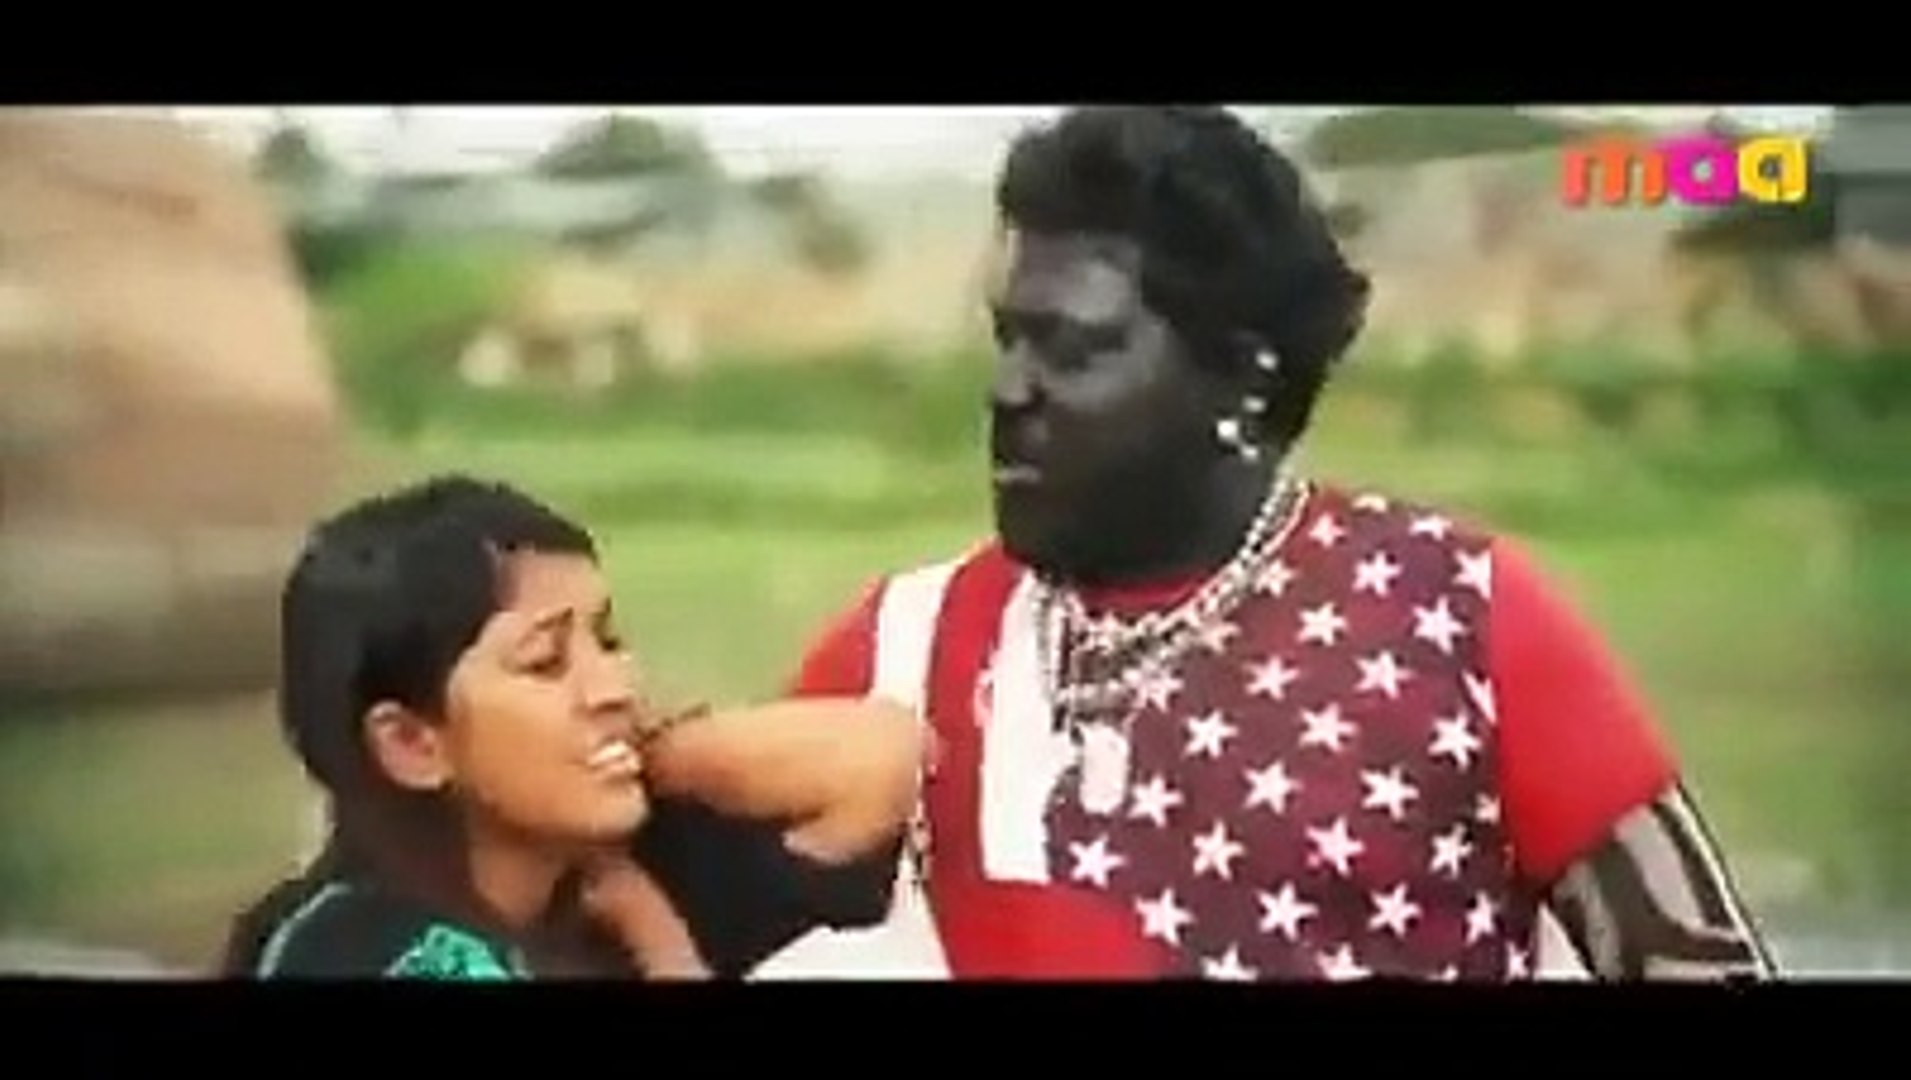 Funny south indian video, most funny movie scene - video Dailymotion